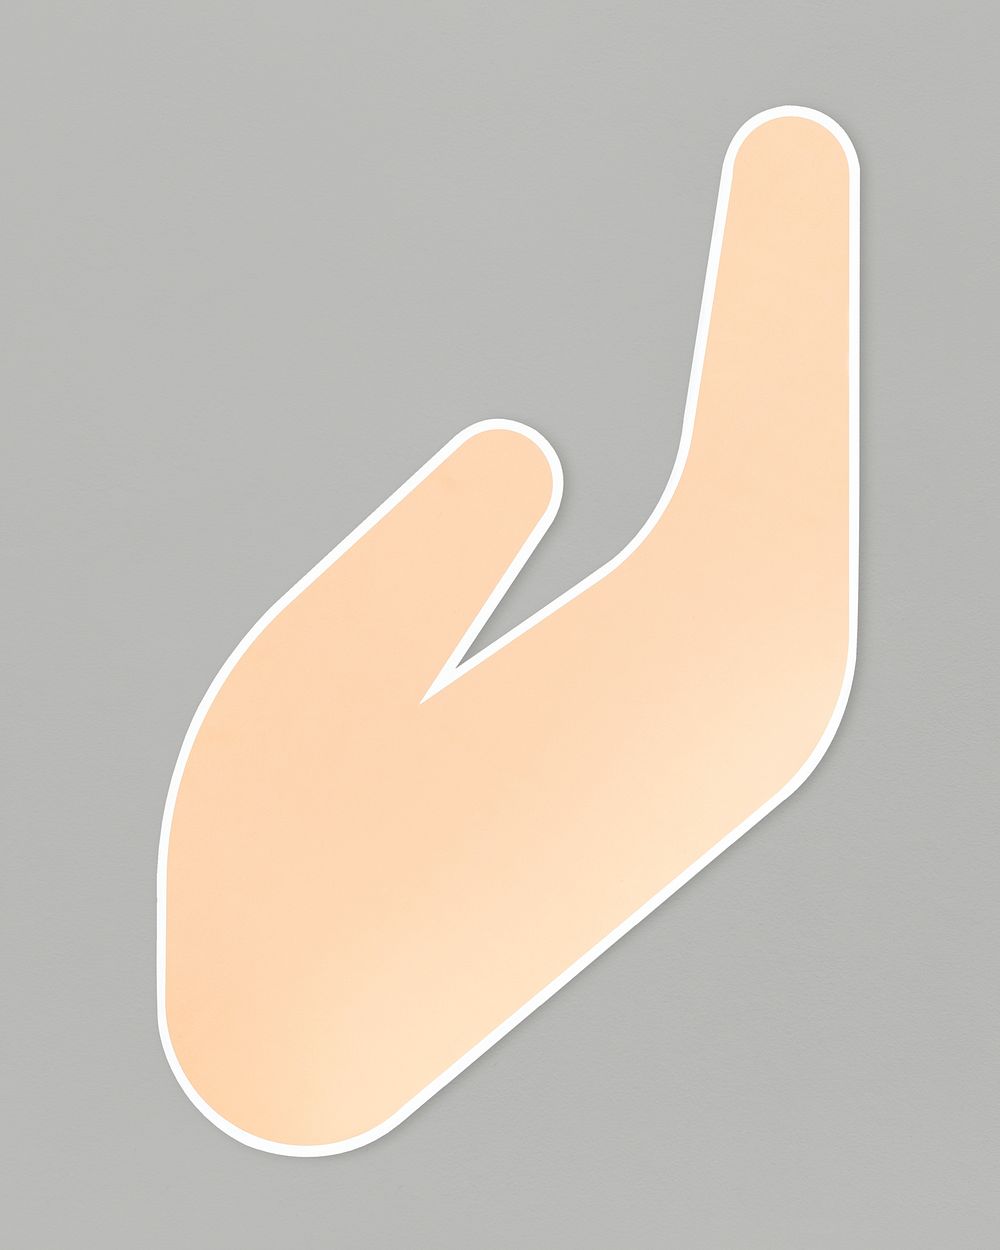 Giving alms hand gesture icon